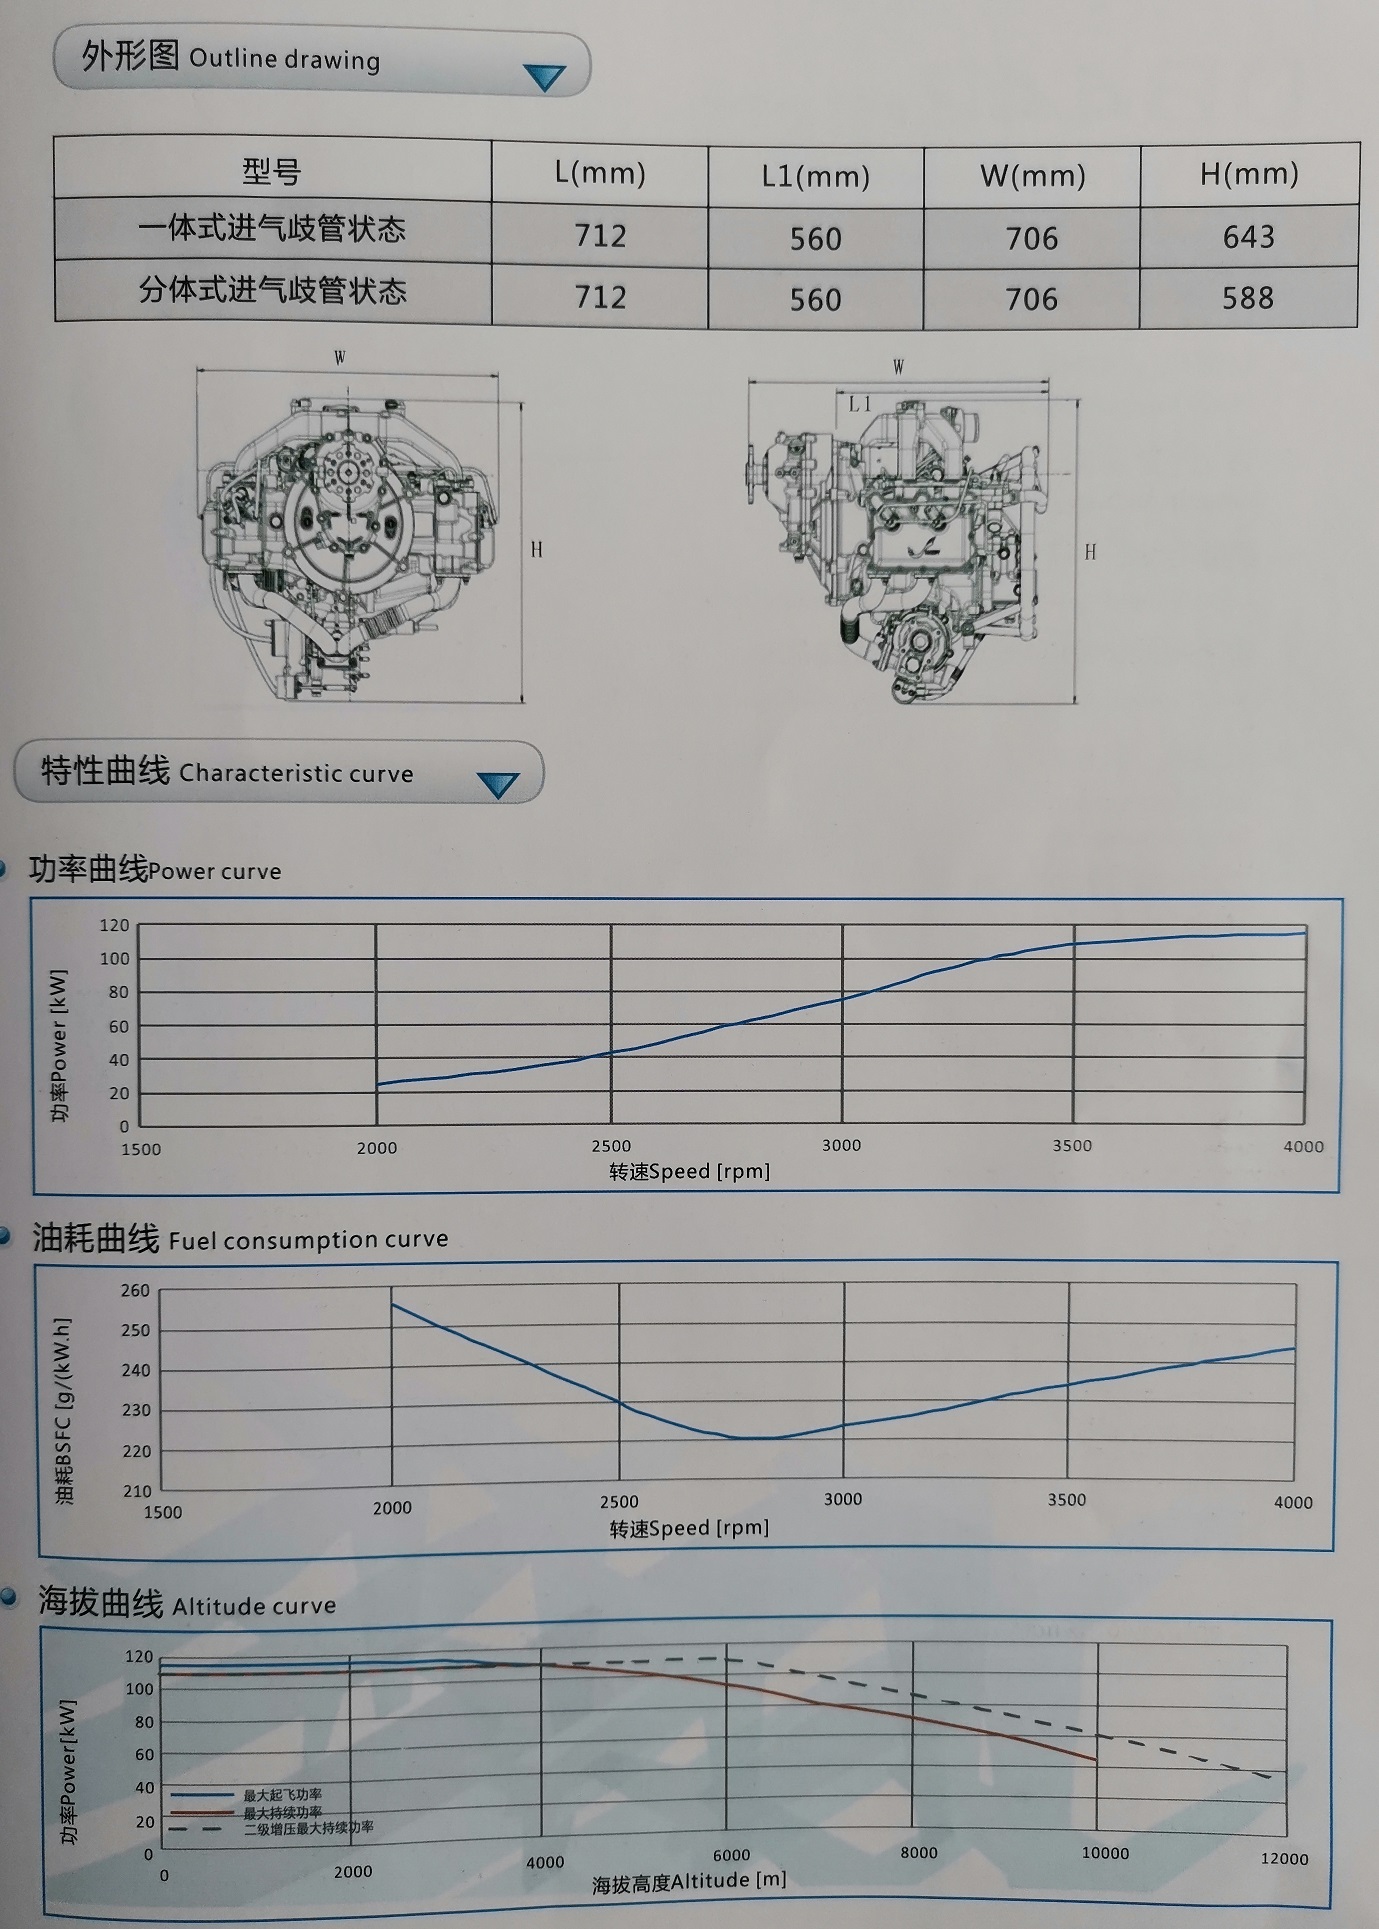 115kW military drone heavy fuel engine characteristic curve